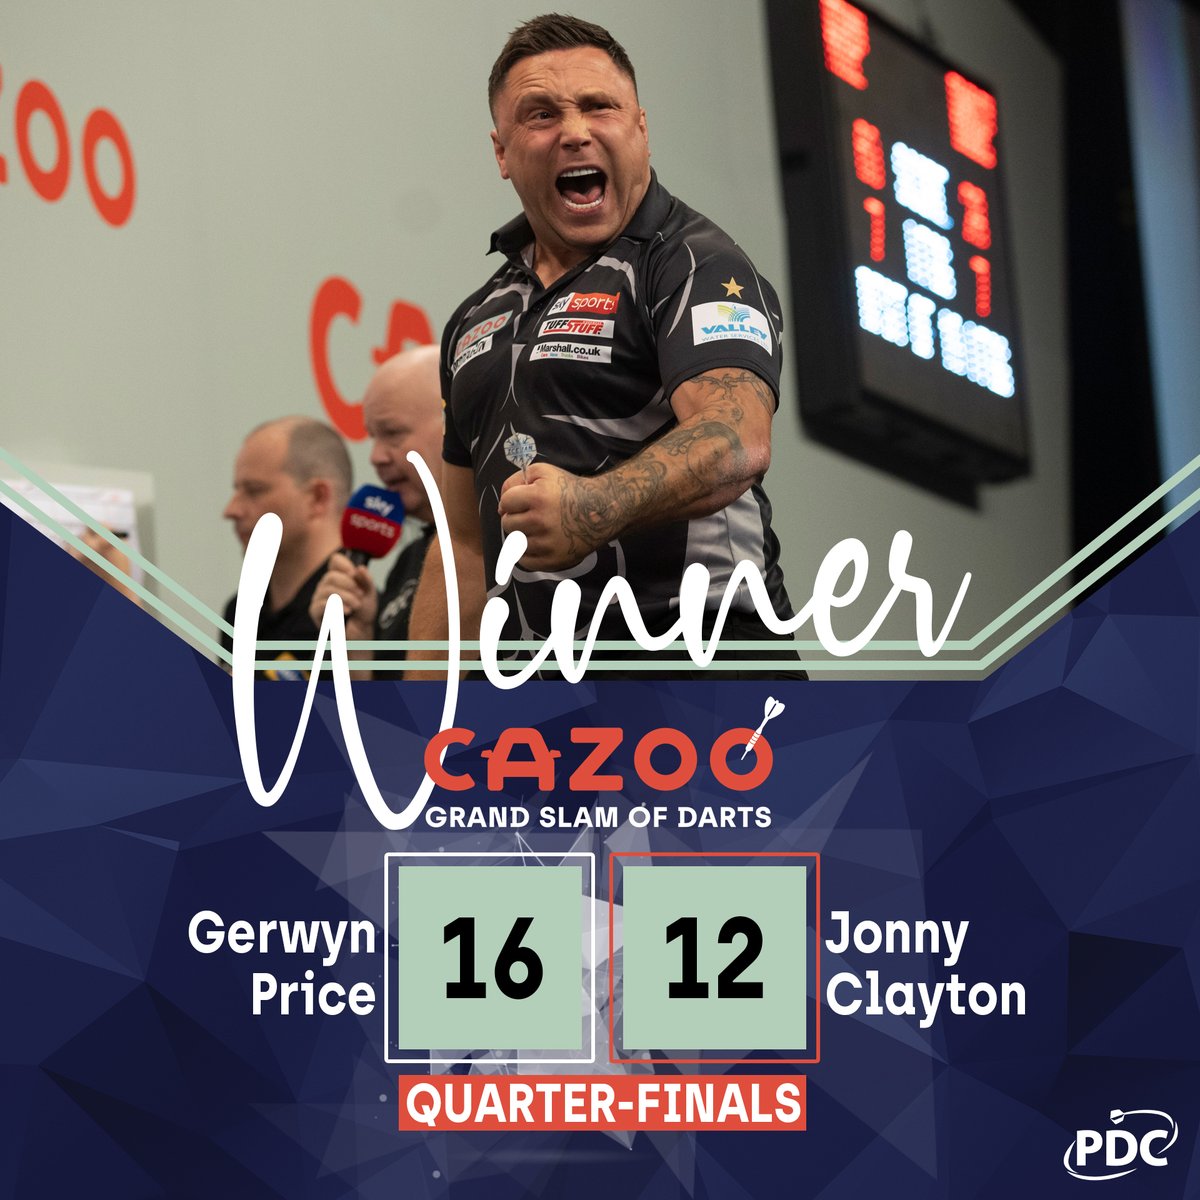 𝗣𝗥𝗜𝗖𝗘 𝗜𝗡𝗧𝗢 𝗧𝗛𝗘 𝗦𝗘𝗠𝗜𝗦!❄️ Gerwyn Price gets one over Jonny Clayton, avenging his World Grand Prix final loss to continue his quest for a third Grand Slam title in four years!